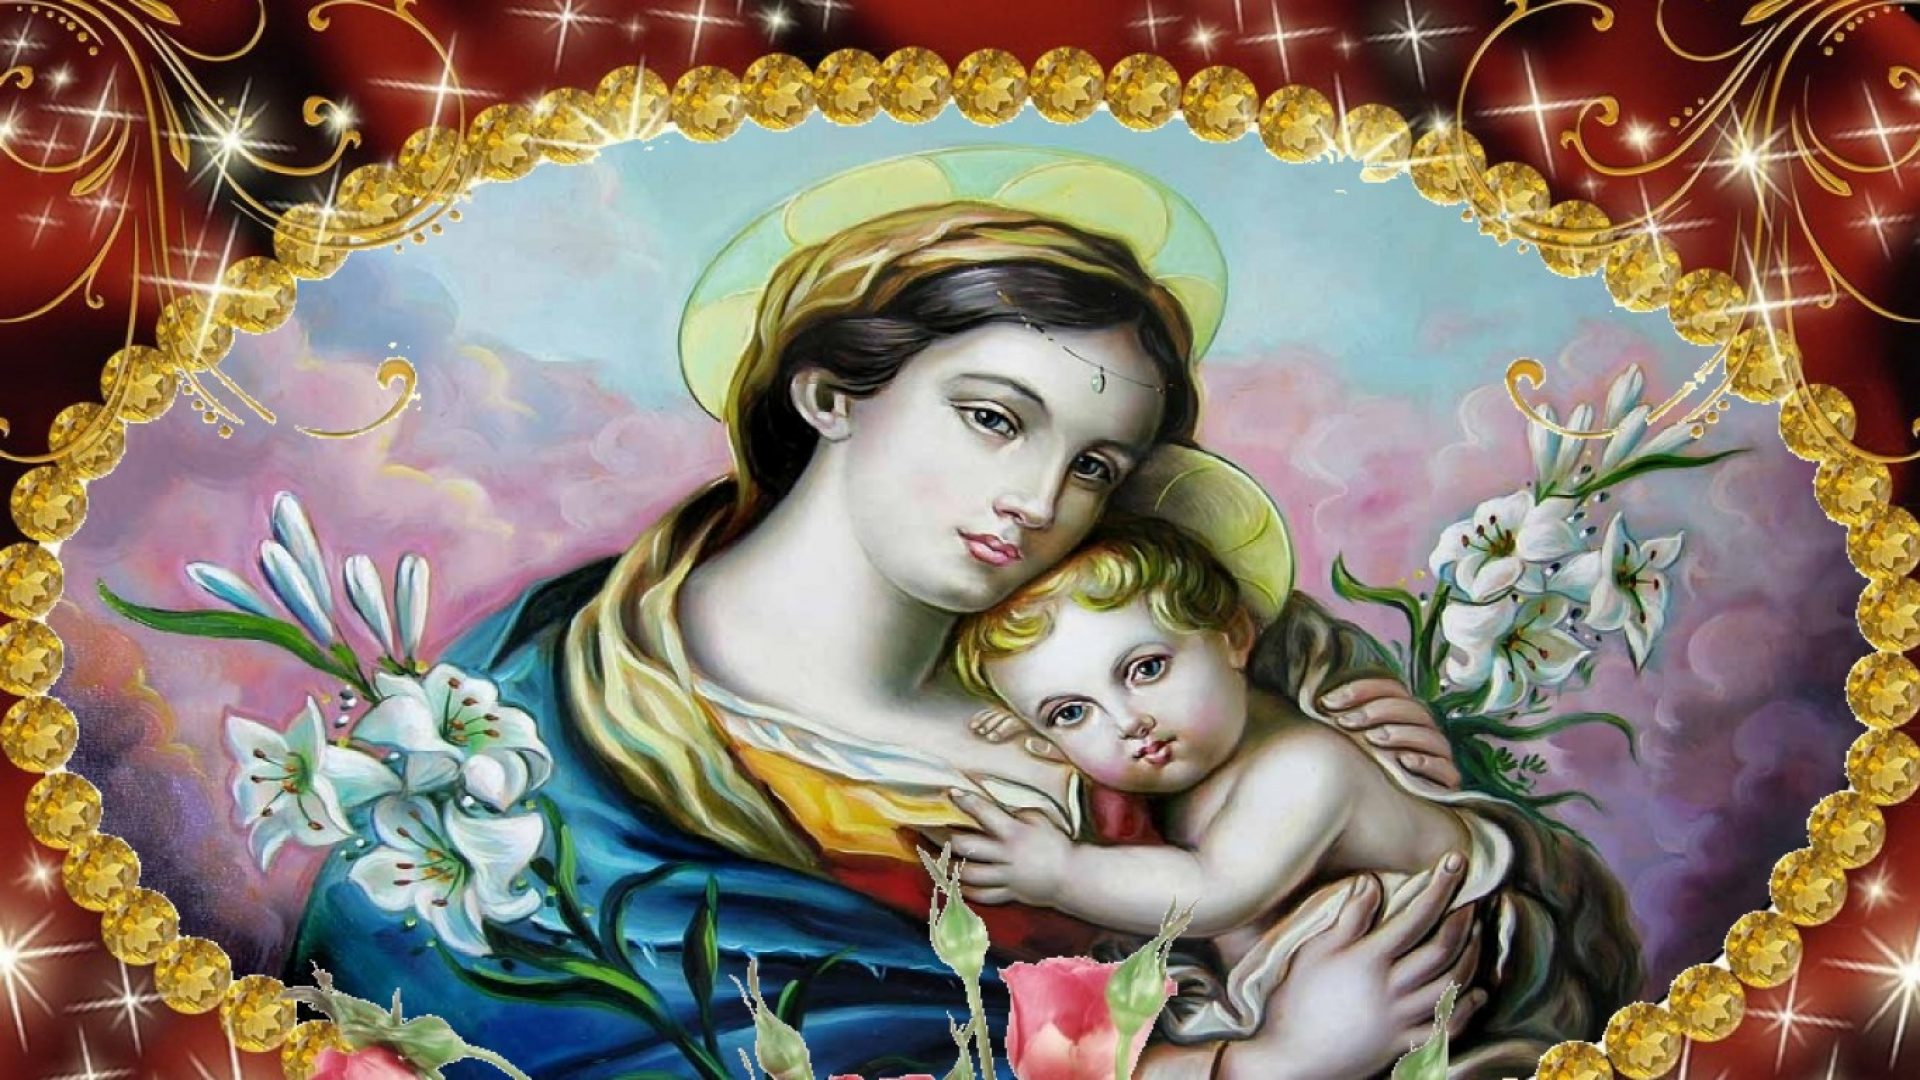 Beautiful 3d Hd Image Of Mother Mary And Baby Jesus | Christian Wallpapers